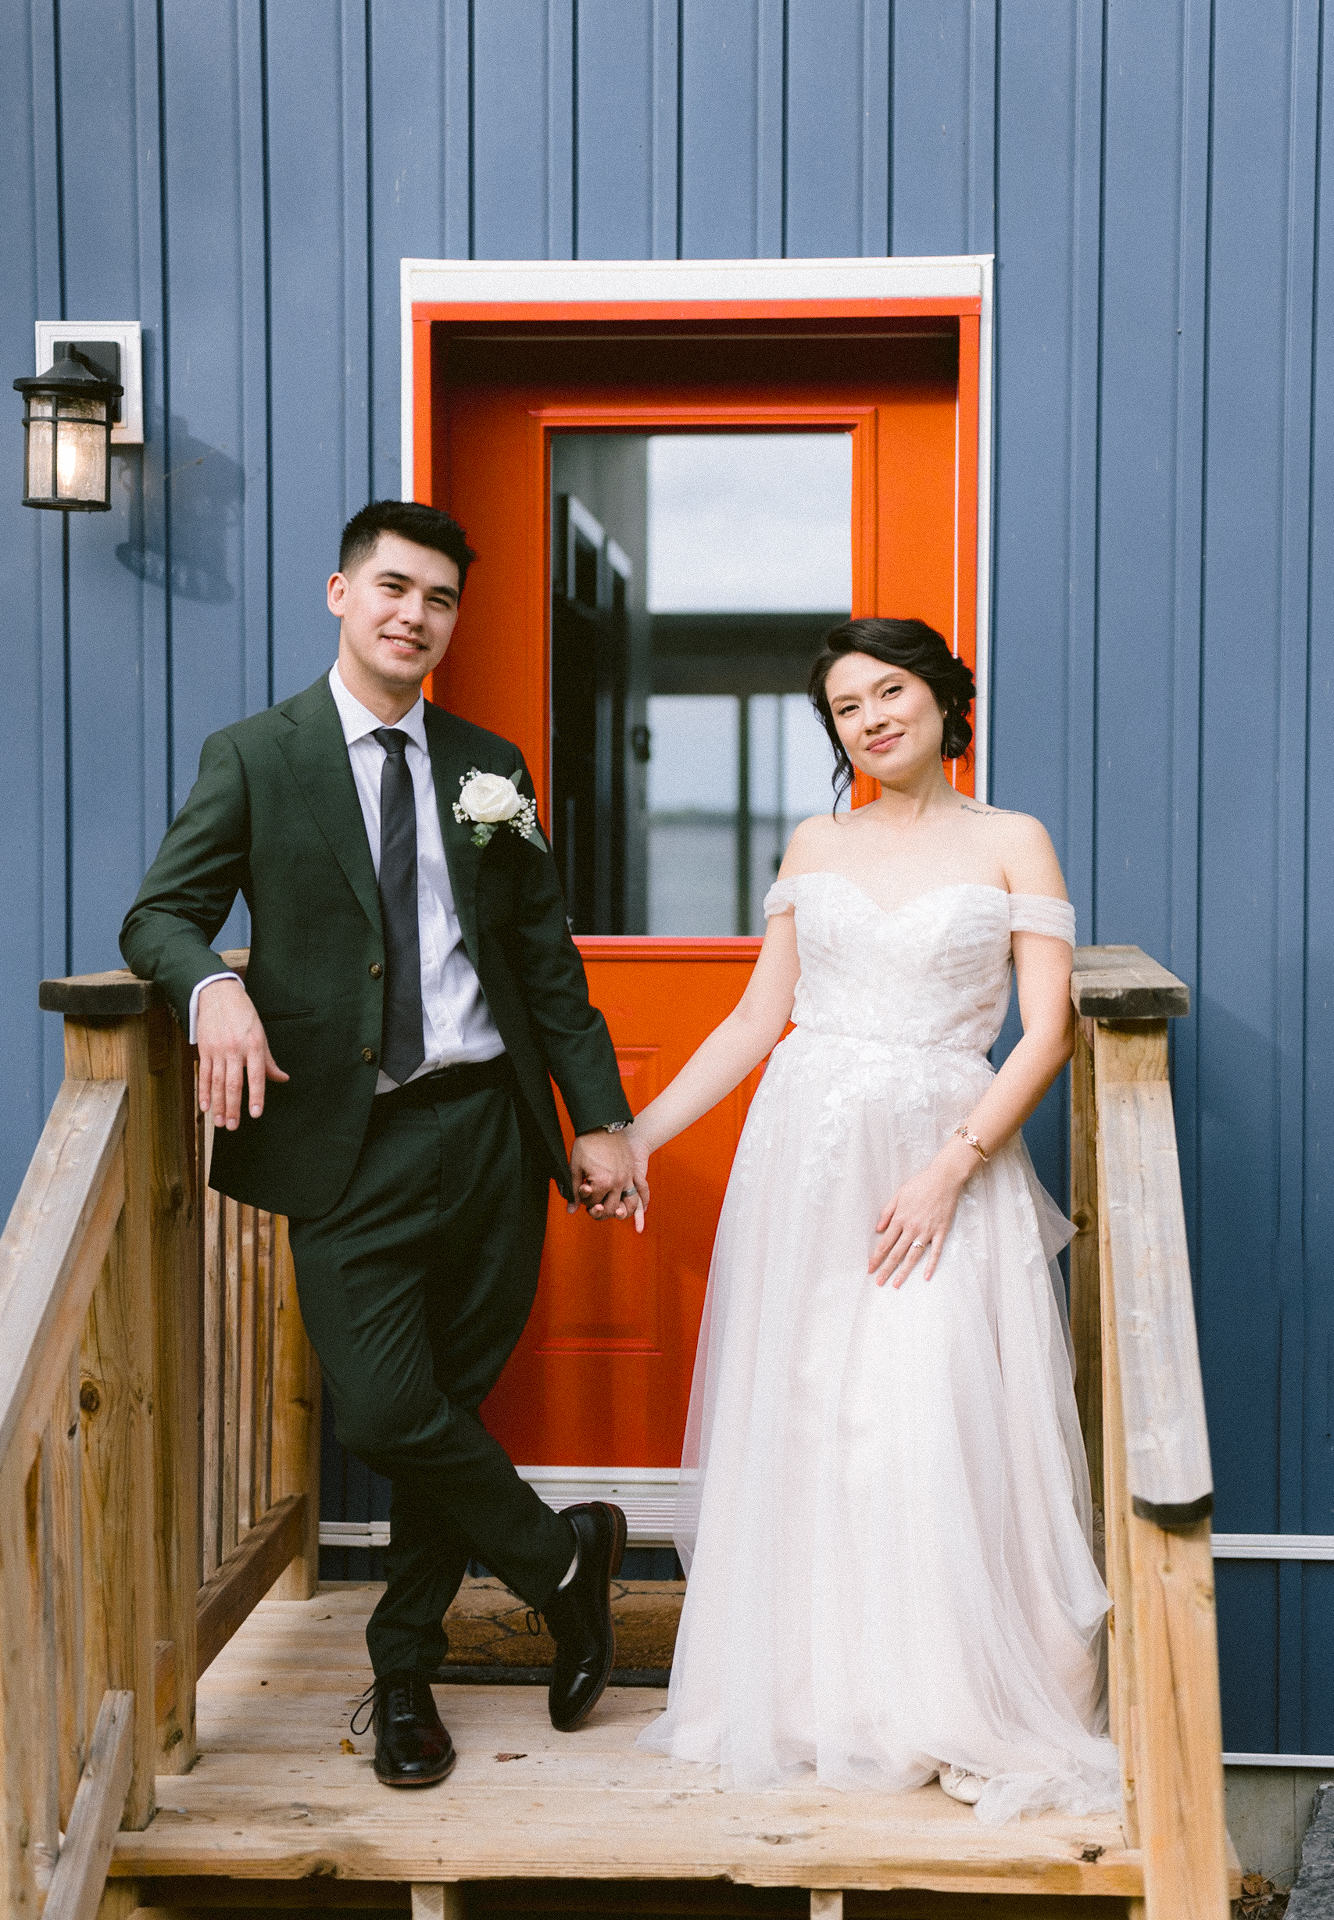 Newlyweds posing in front of a vibrant red door, embodying elegance and happiness